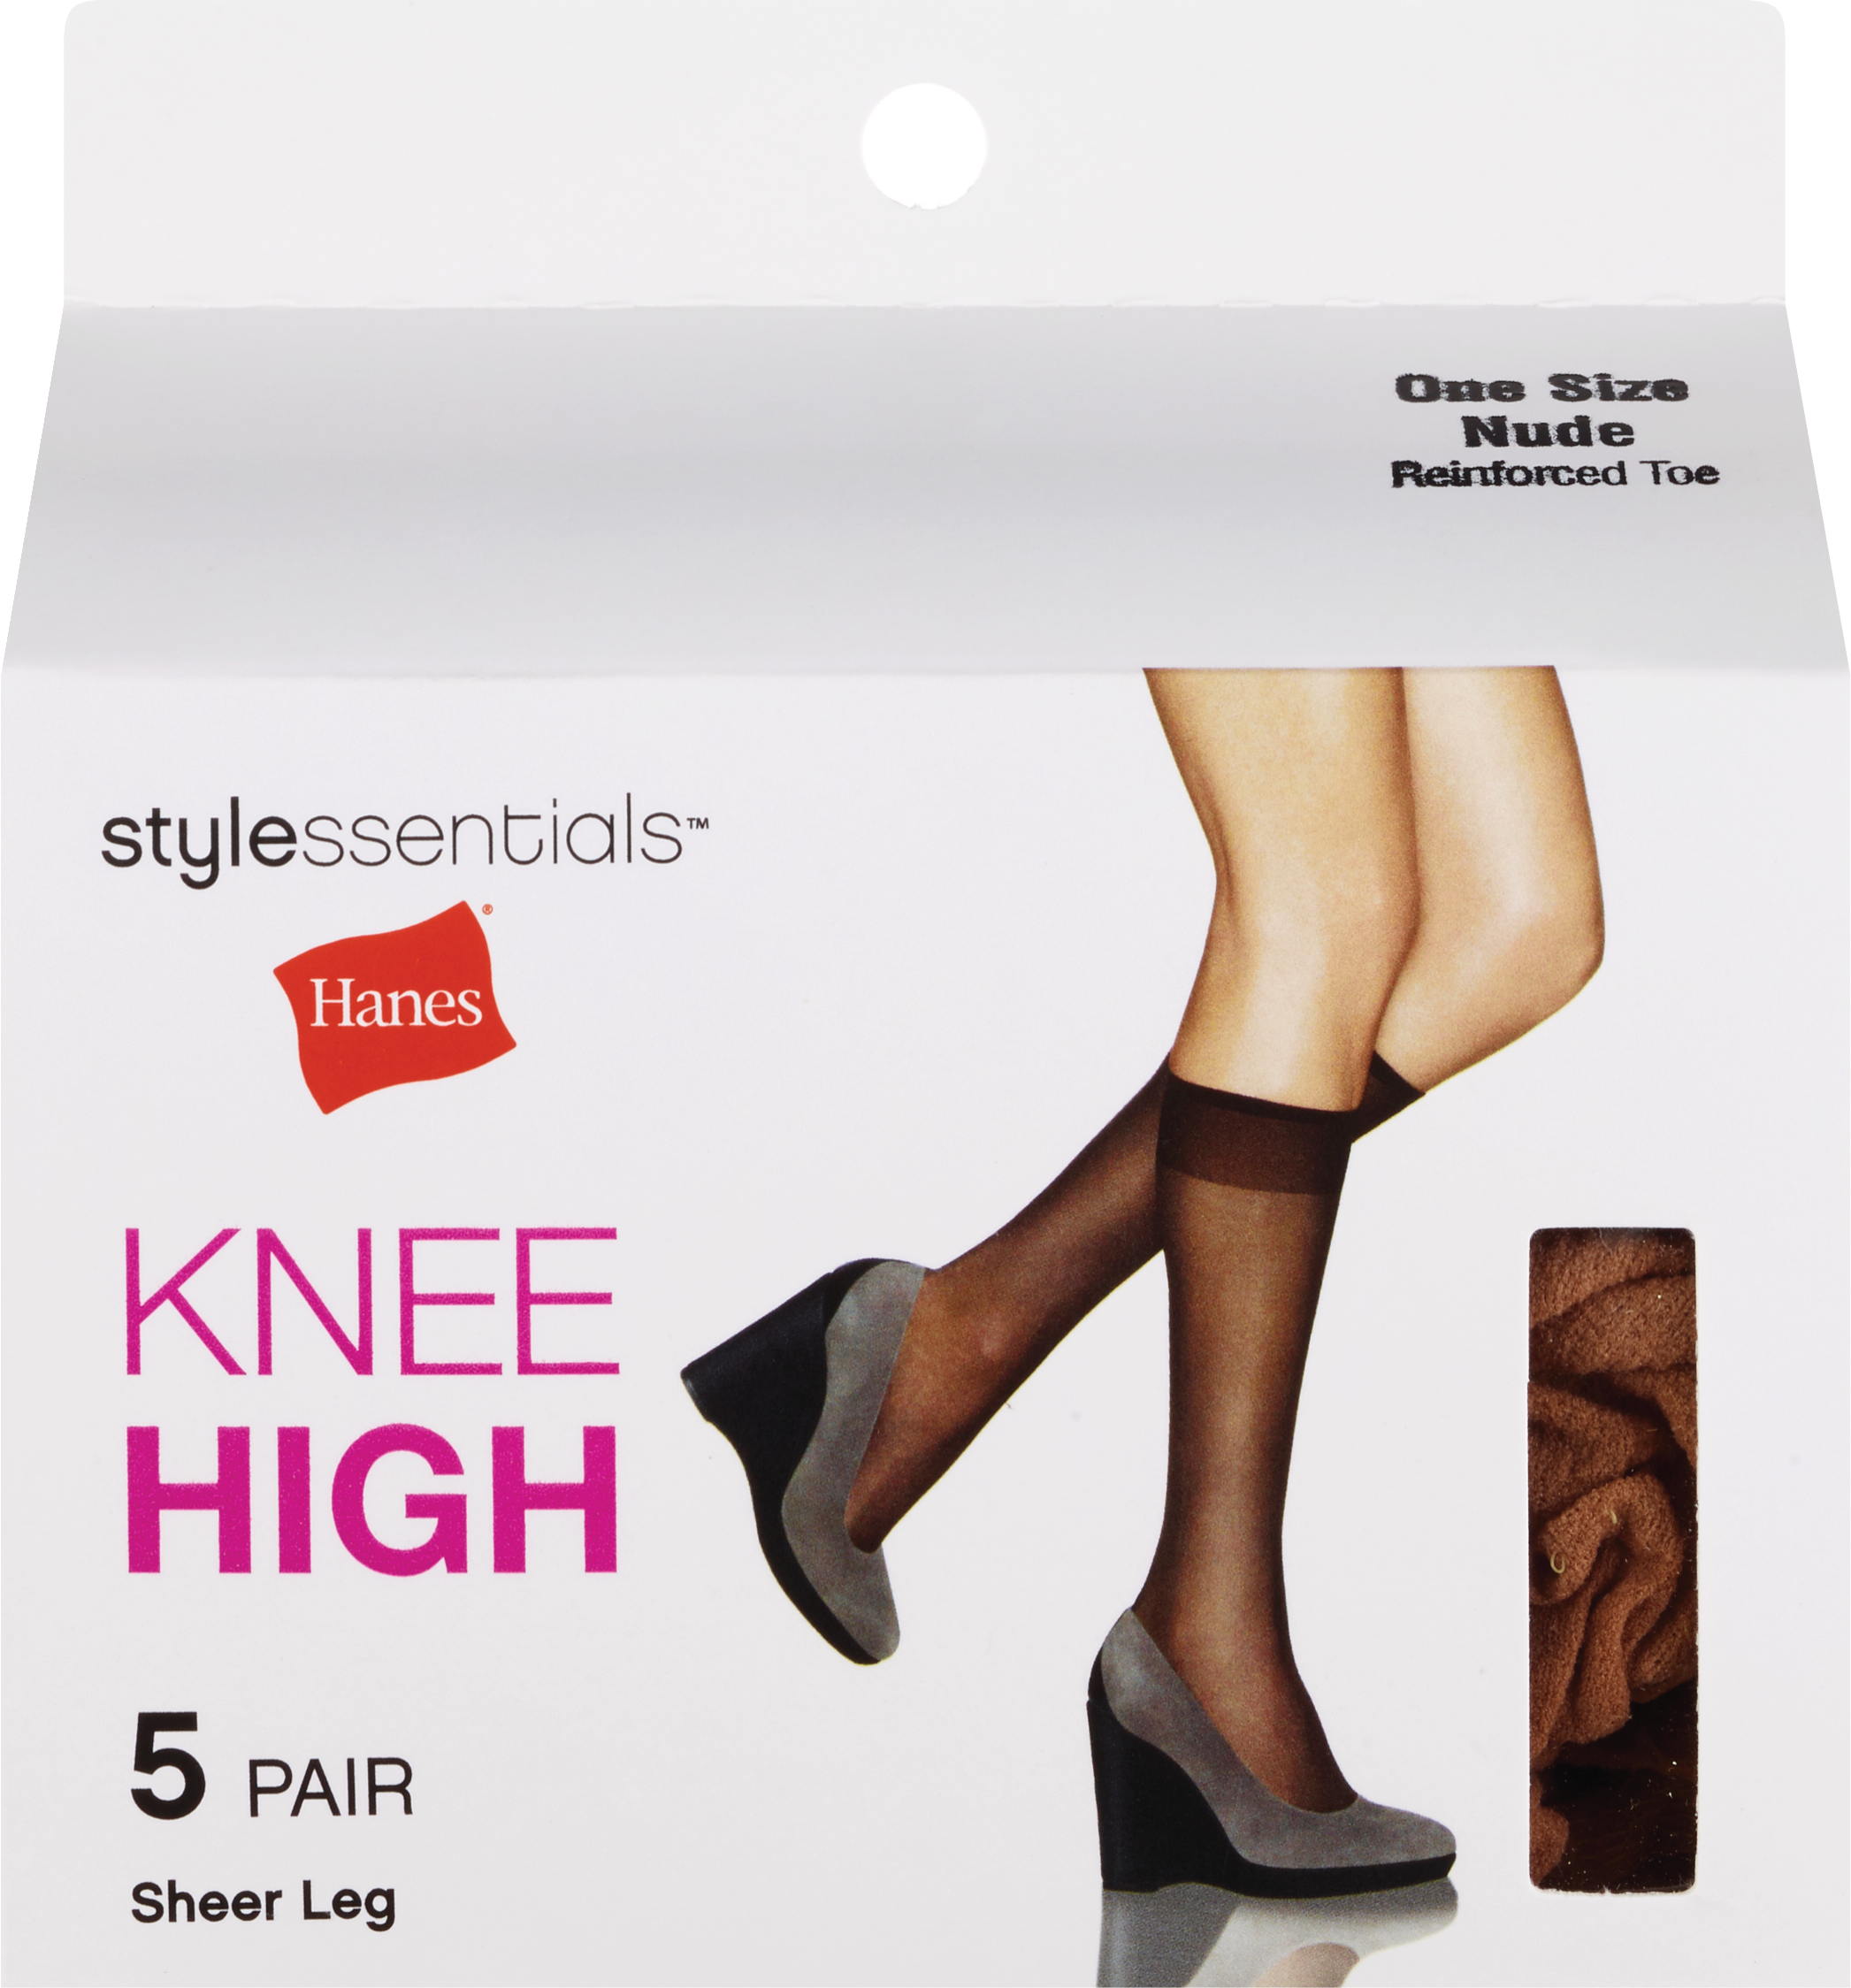 Style Essentials by Hanes One Size Knee High Sheer Leg Reinforced Toe, 5 Pairs